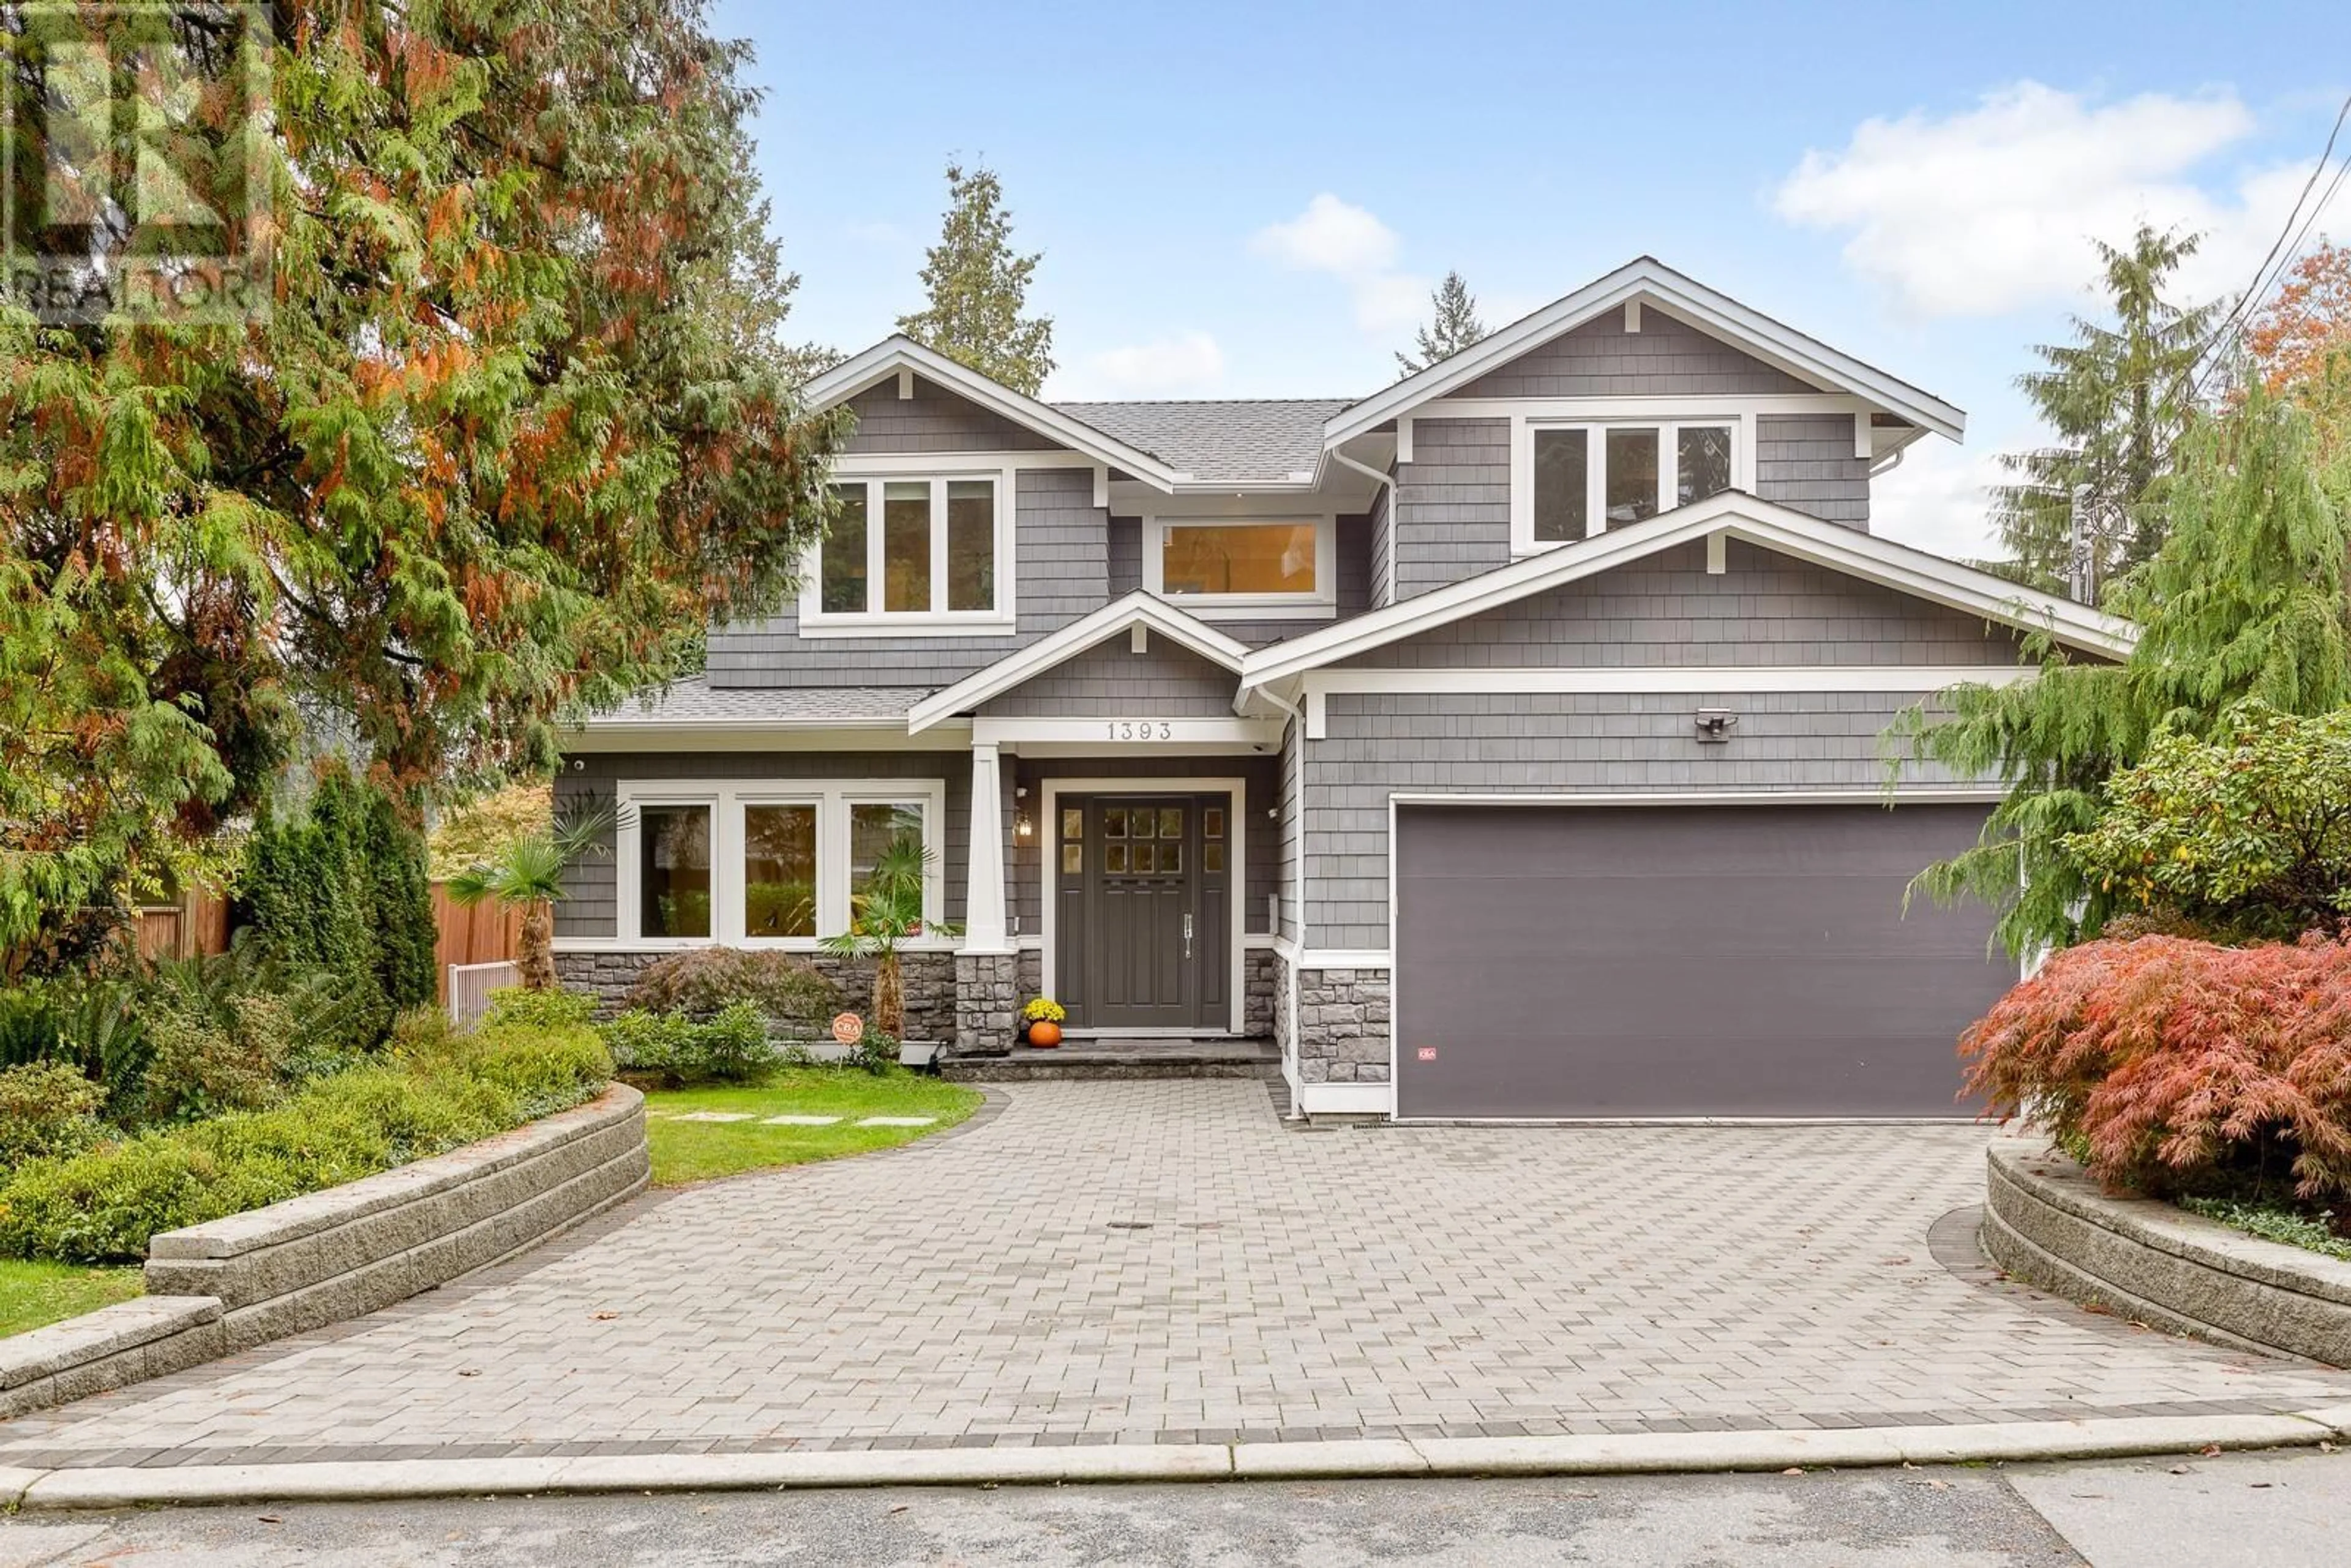 Home with brick exterior material for 1393 GREENBRIAR WAY, North Vancouver British Columbia V7R1M1